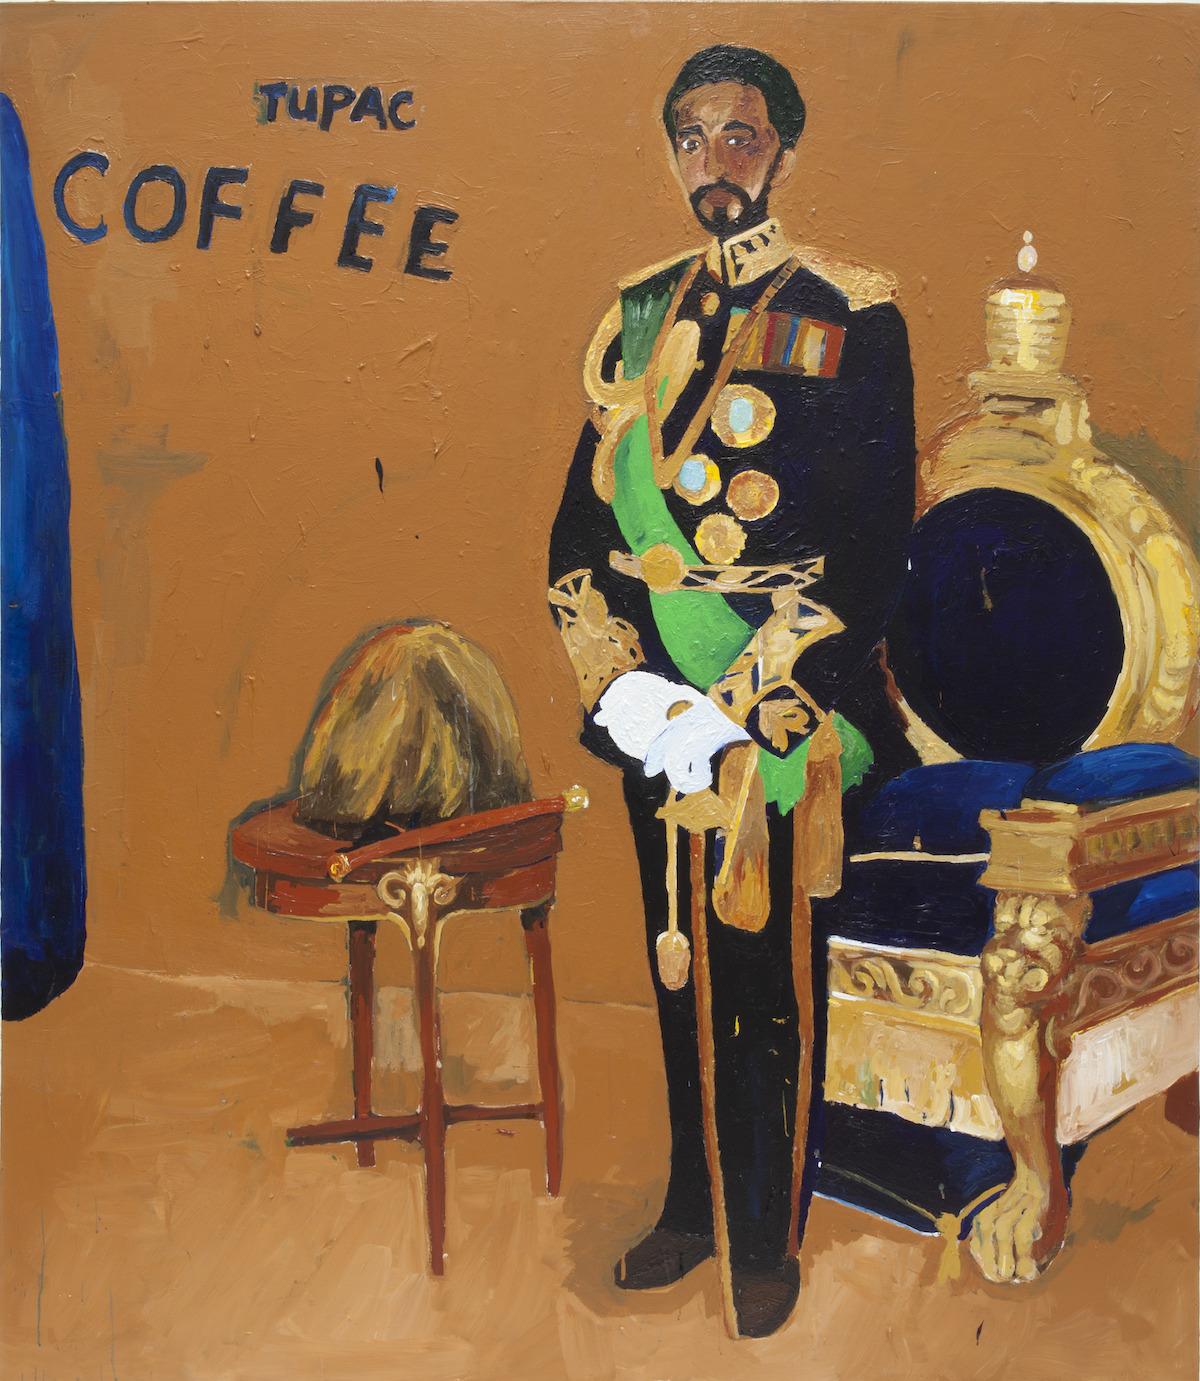 Henry Taylor, It's H. I. M., 2012. Acrylic on canvas, 84 × 72 in. (213.4 × 182.9 cm). Collection of Amy and Harris Schwalb. © Henry Taylor. Courtesy the artist and Hauser & Wirth. Photograph by Sam Kahn